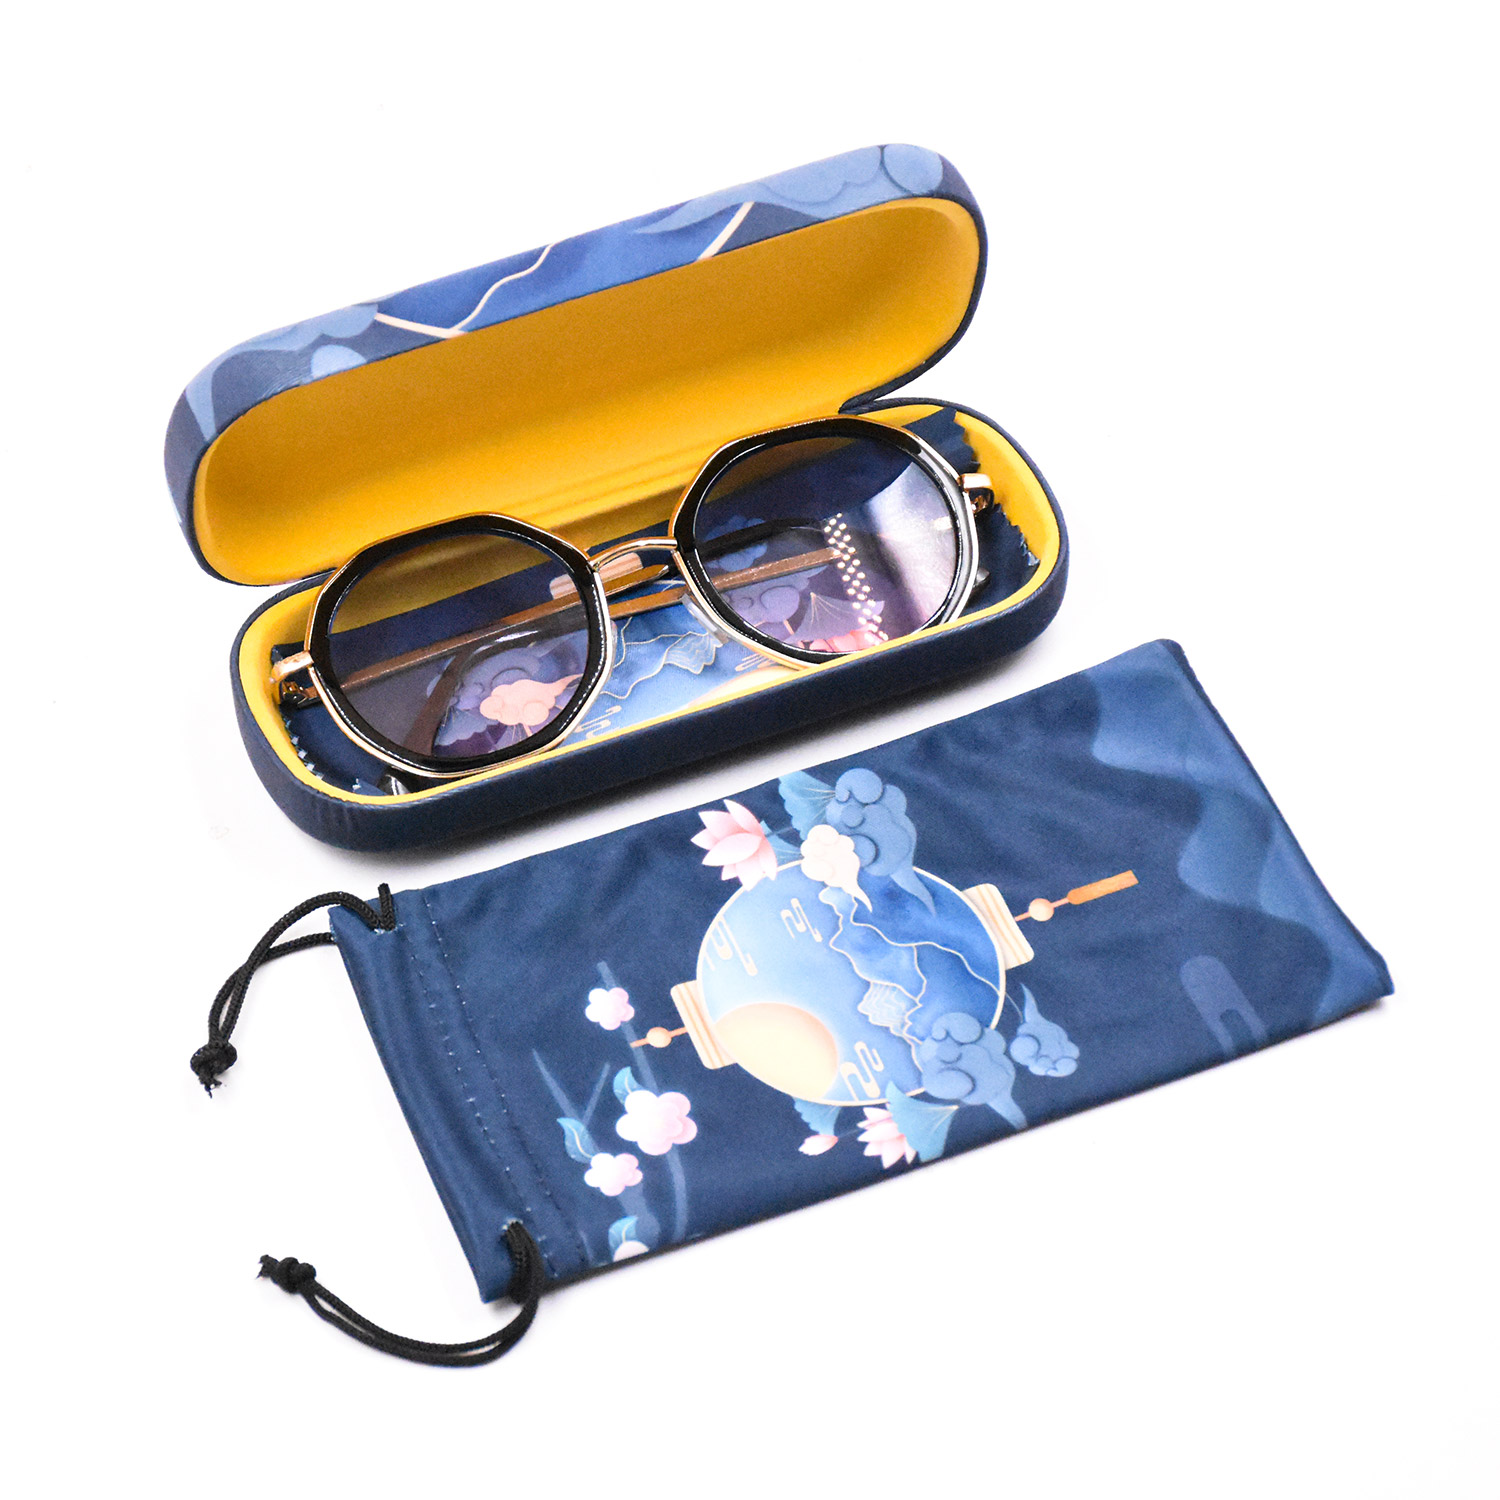 Sunglasses Eyewear Packing Glasses Cases Box Set with Glasses Cloth Eyeglasses Case Pouch